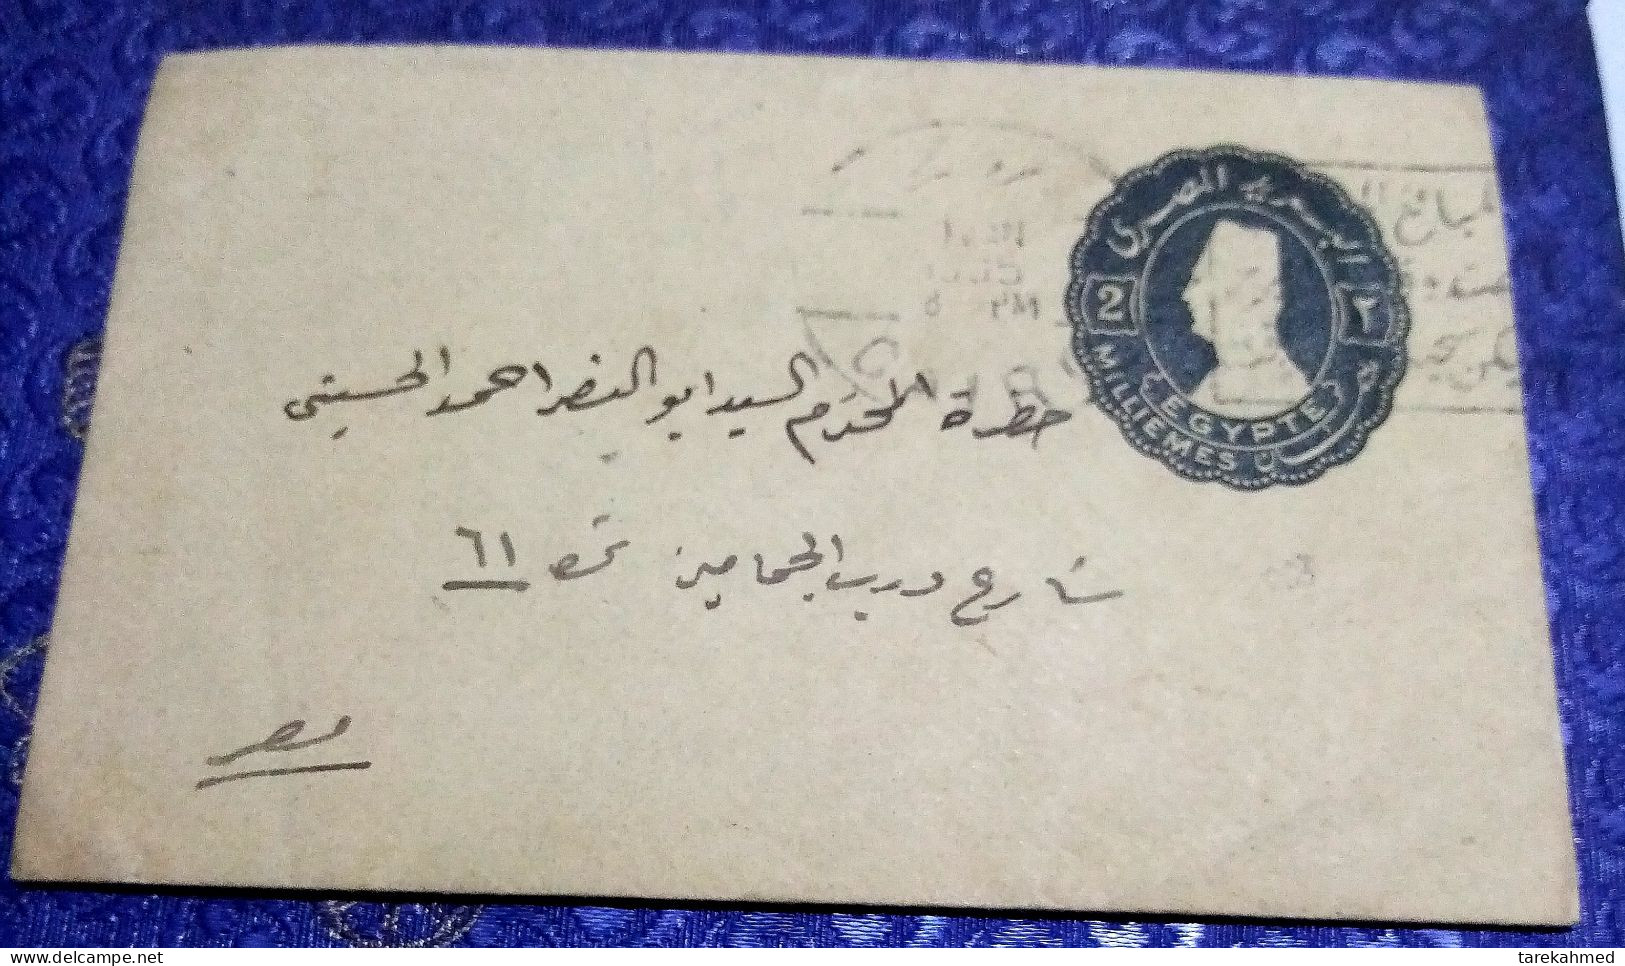 Egypt 1936, Stationery Envelope Of King Fuad (2 Milliems) Sent Locally With Greeting Card Inside. Dolab - Briefe U. Dokumente